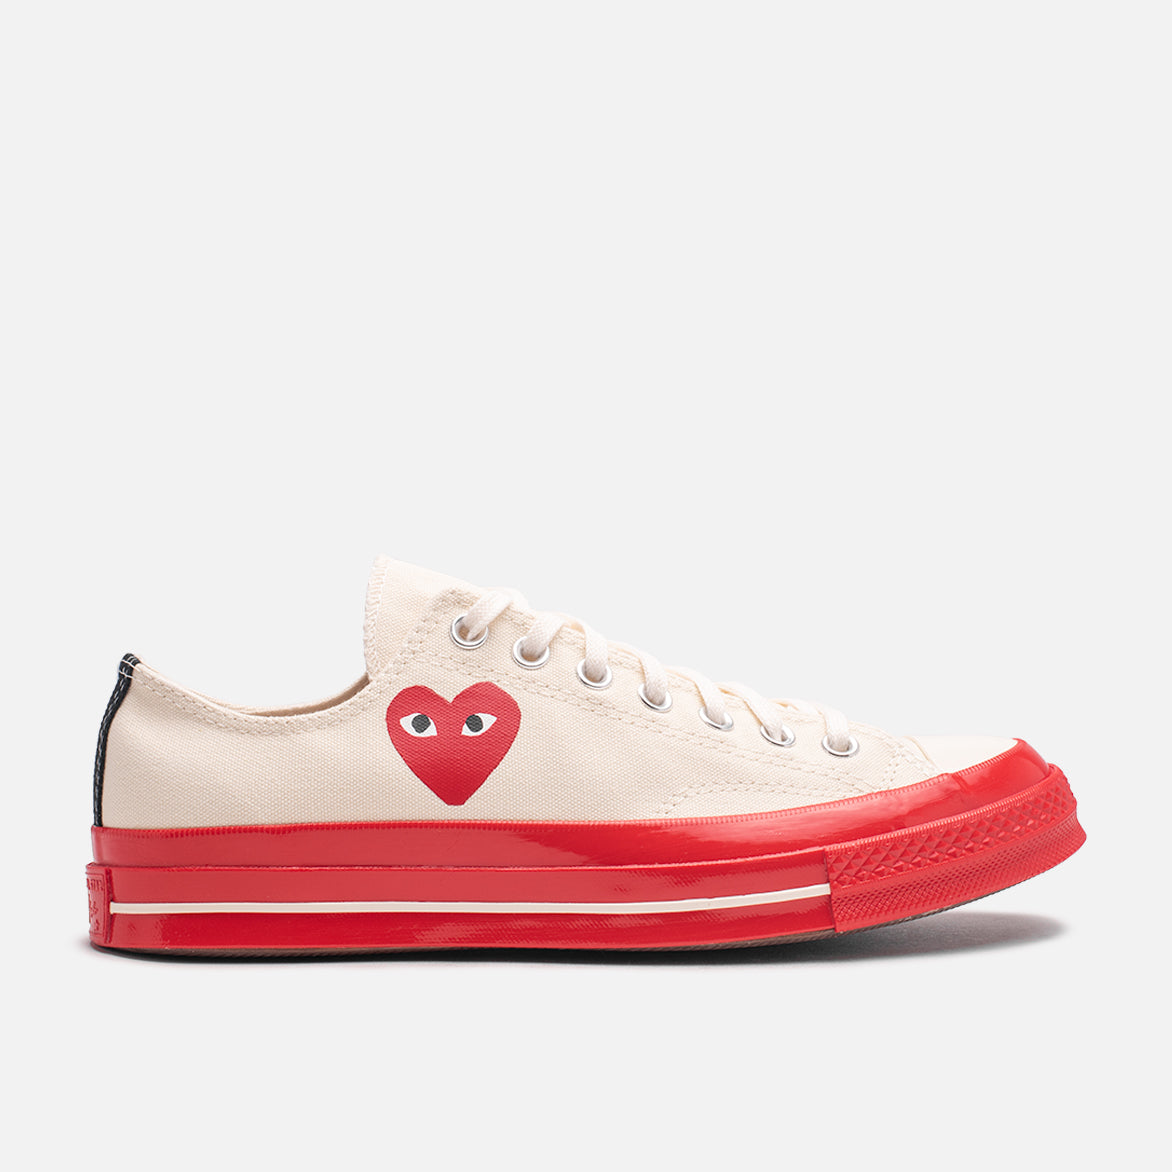 CDG PLAY X CONVERSE CHUCK 70 OX - PRISTINE RED | lapstoneandhammer.com